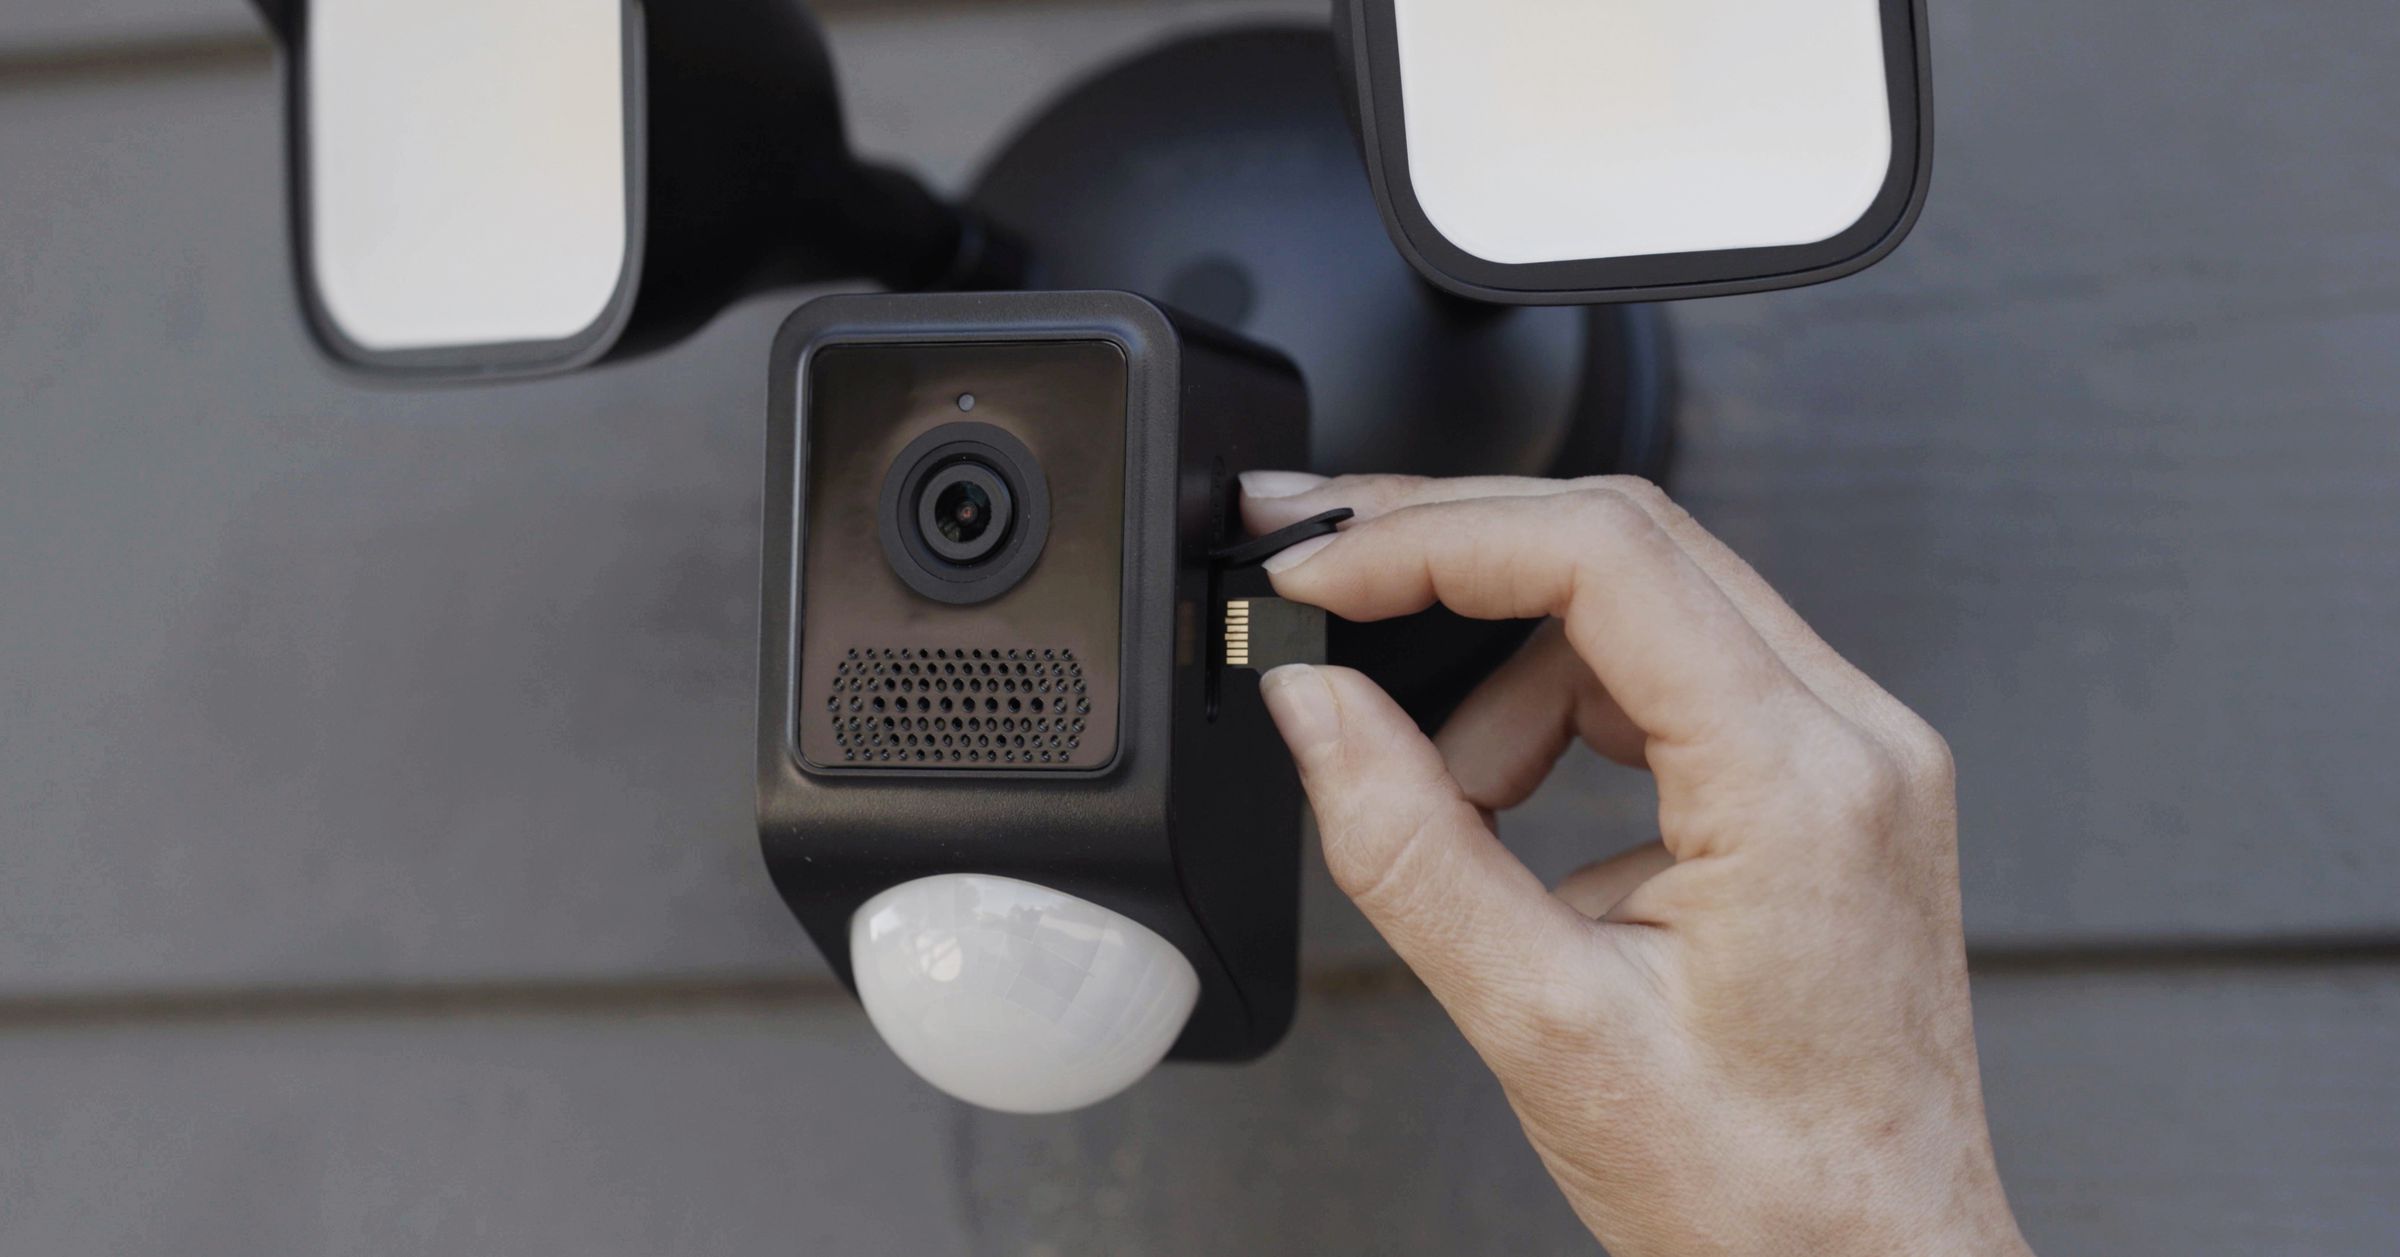 A local storage option on the Wyze Cam Floodlight V2 means you can circumnavigate Wyze’s cloud.